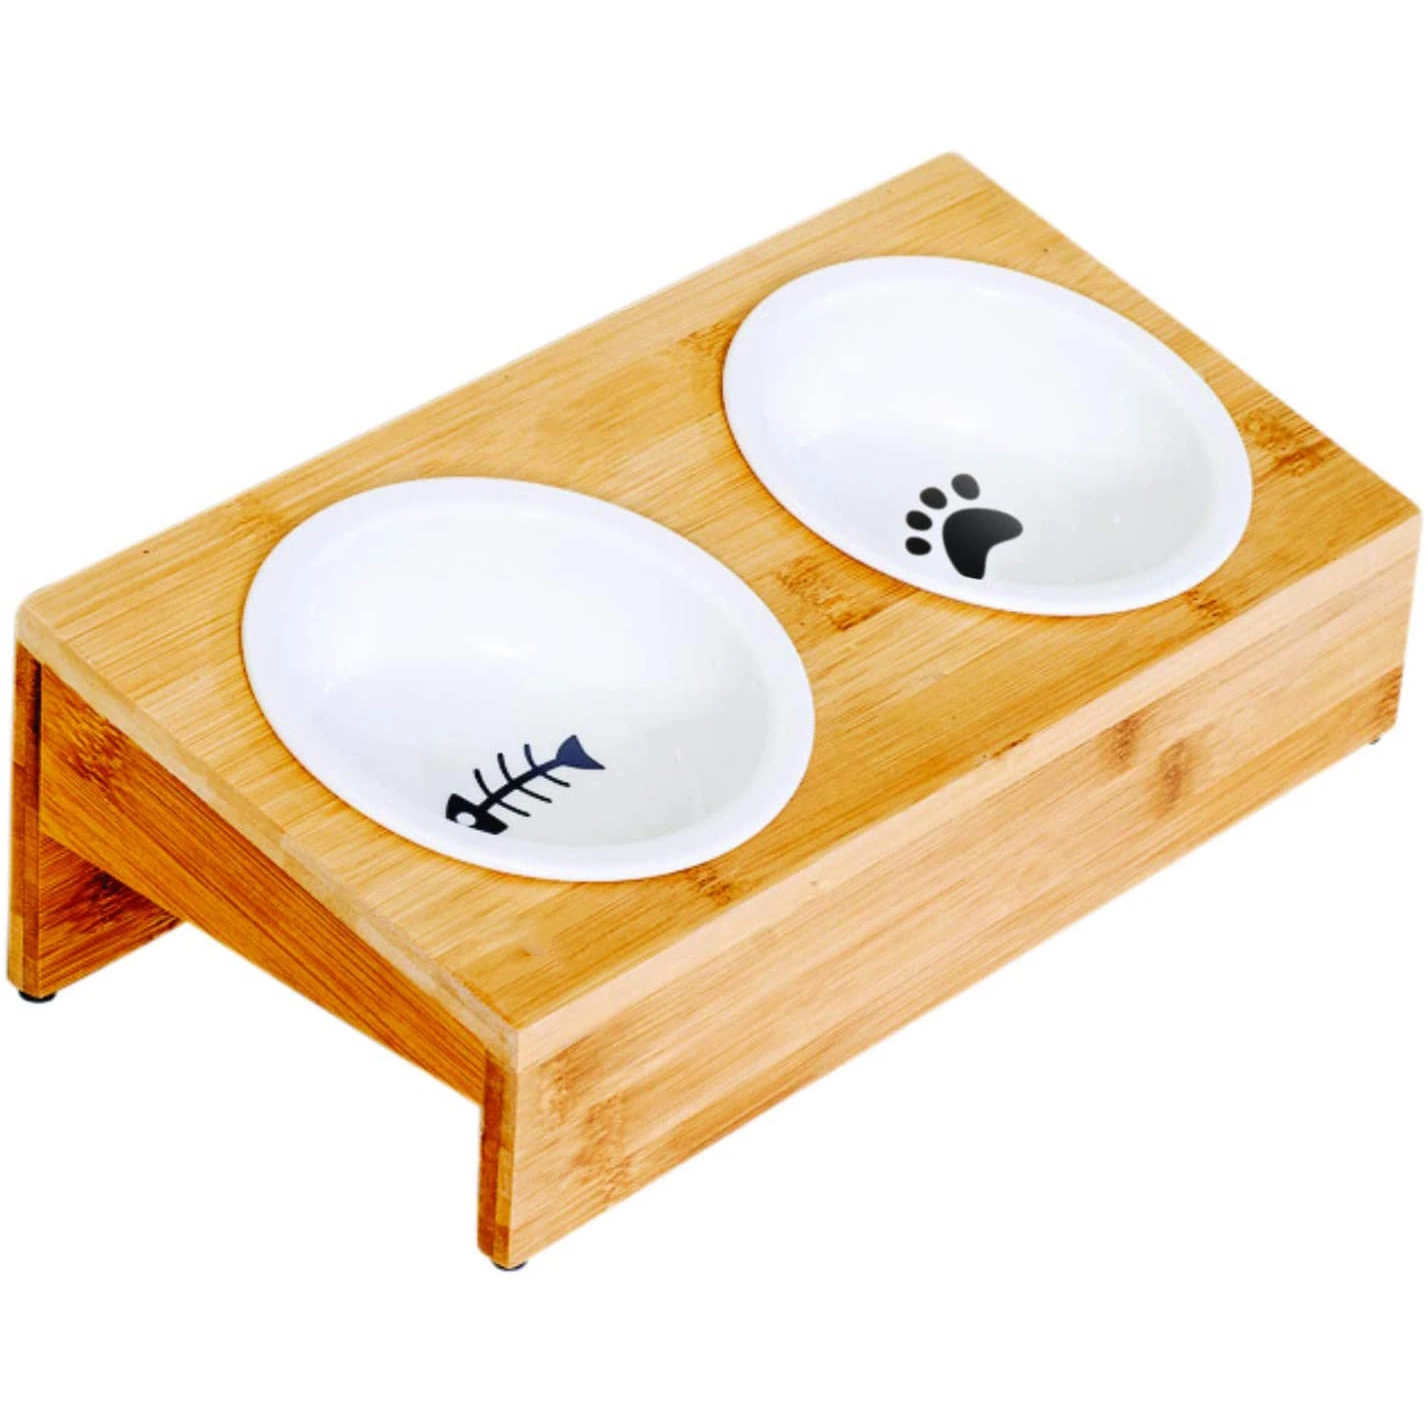 Elevated Bamboo Pet Table with Ceramic Bowls Raised Anti-Slip Tilted Station for Cats Dogs Food/Drink Water-Resistant Surface Clean Feeder